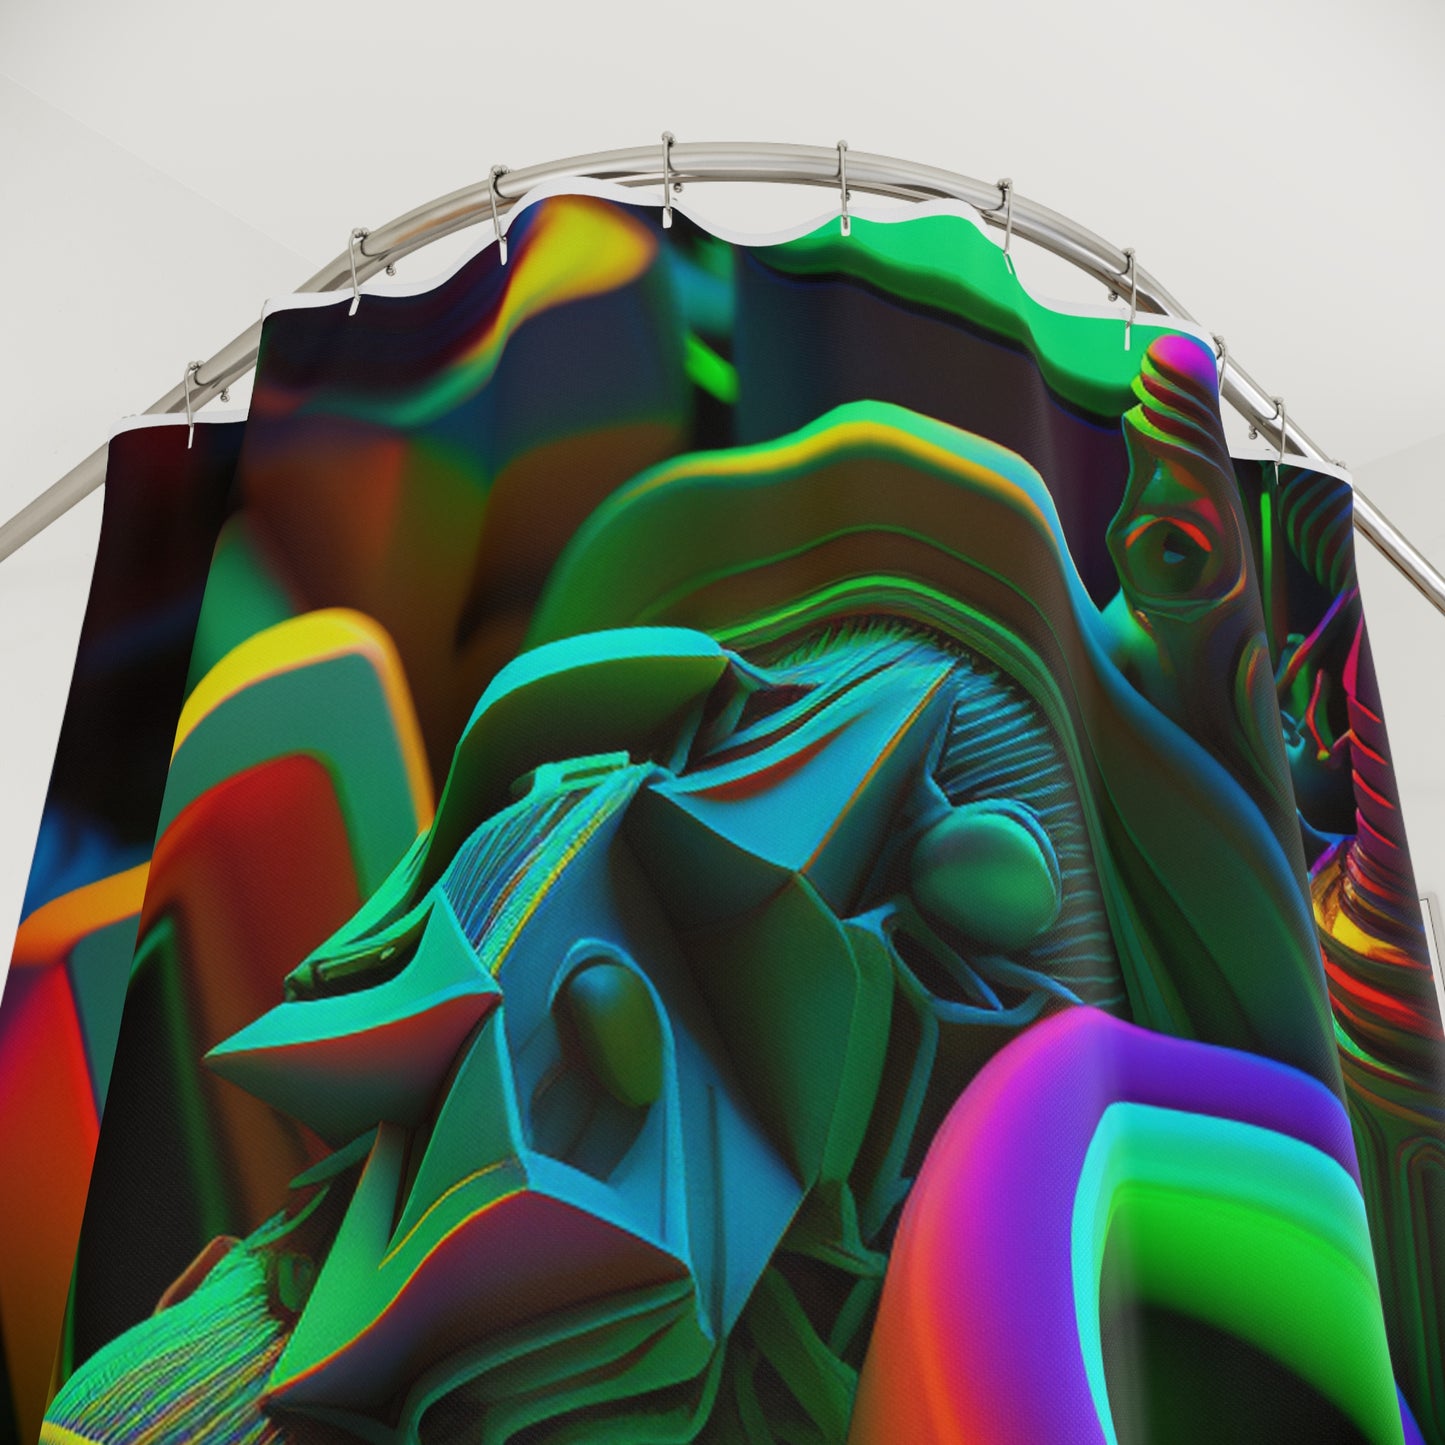 Polyester Shower Curtain Neon Glow 2